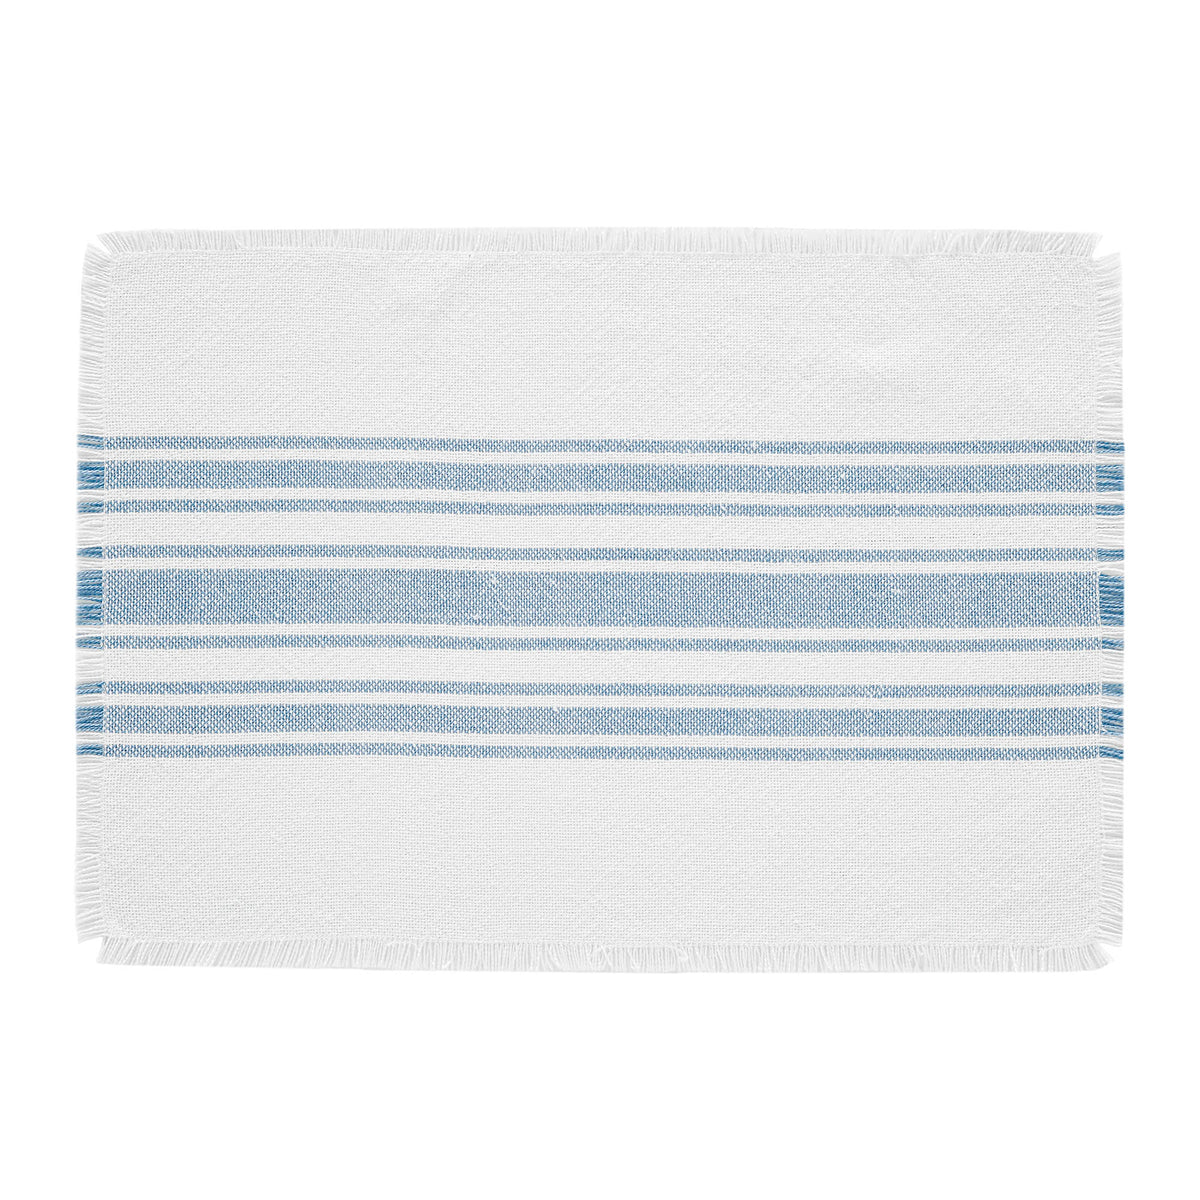 Antique White Stripe Blue Indoor/Outdoor Placemat Set of 6 13x19